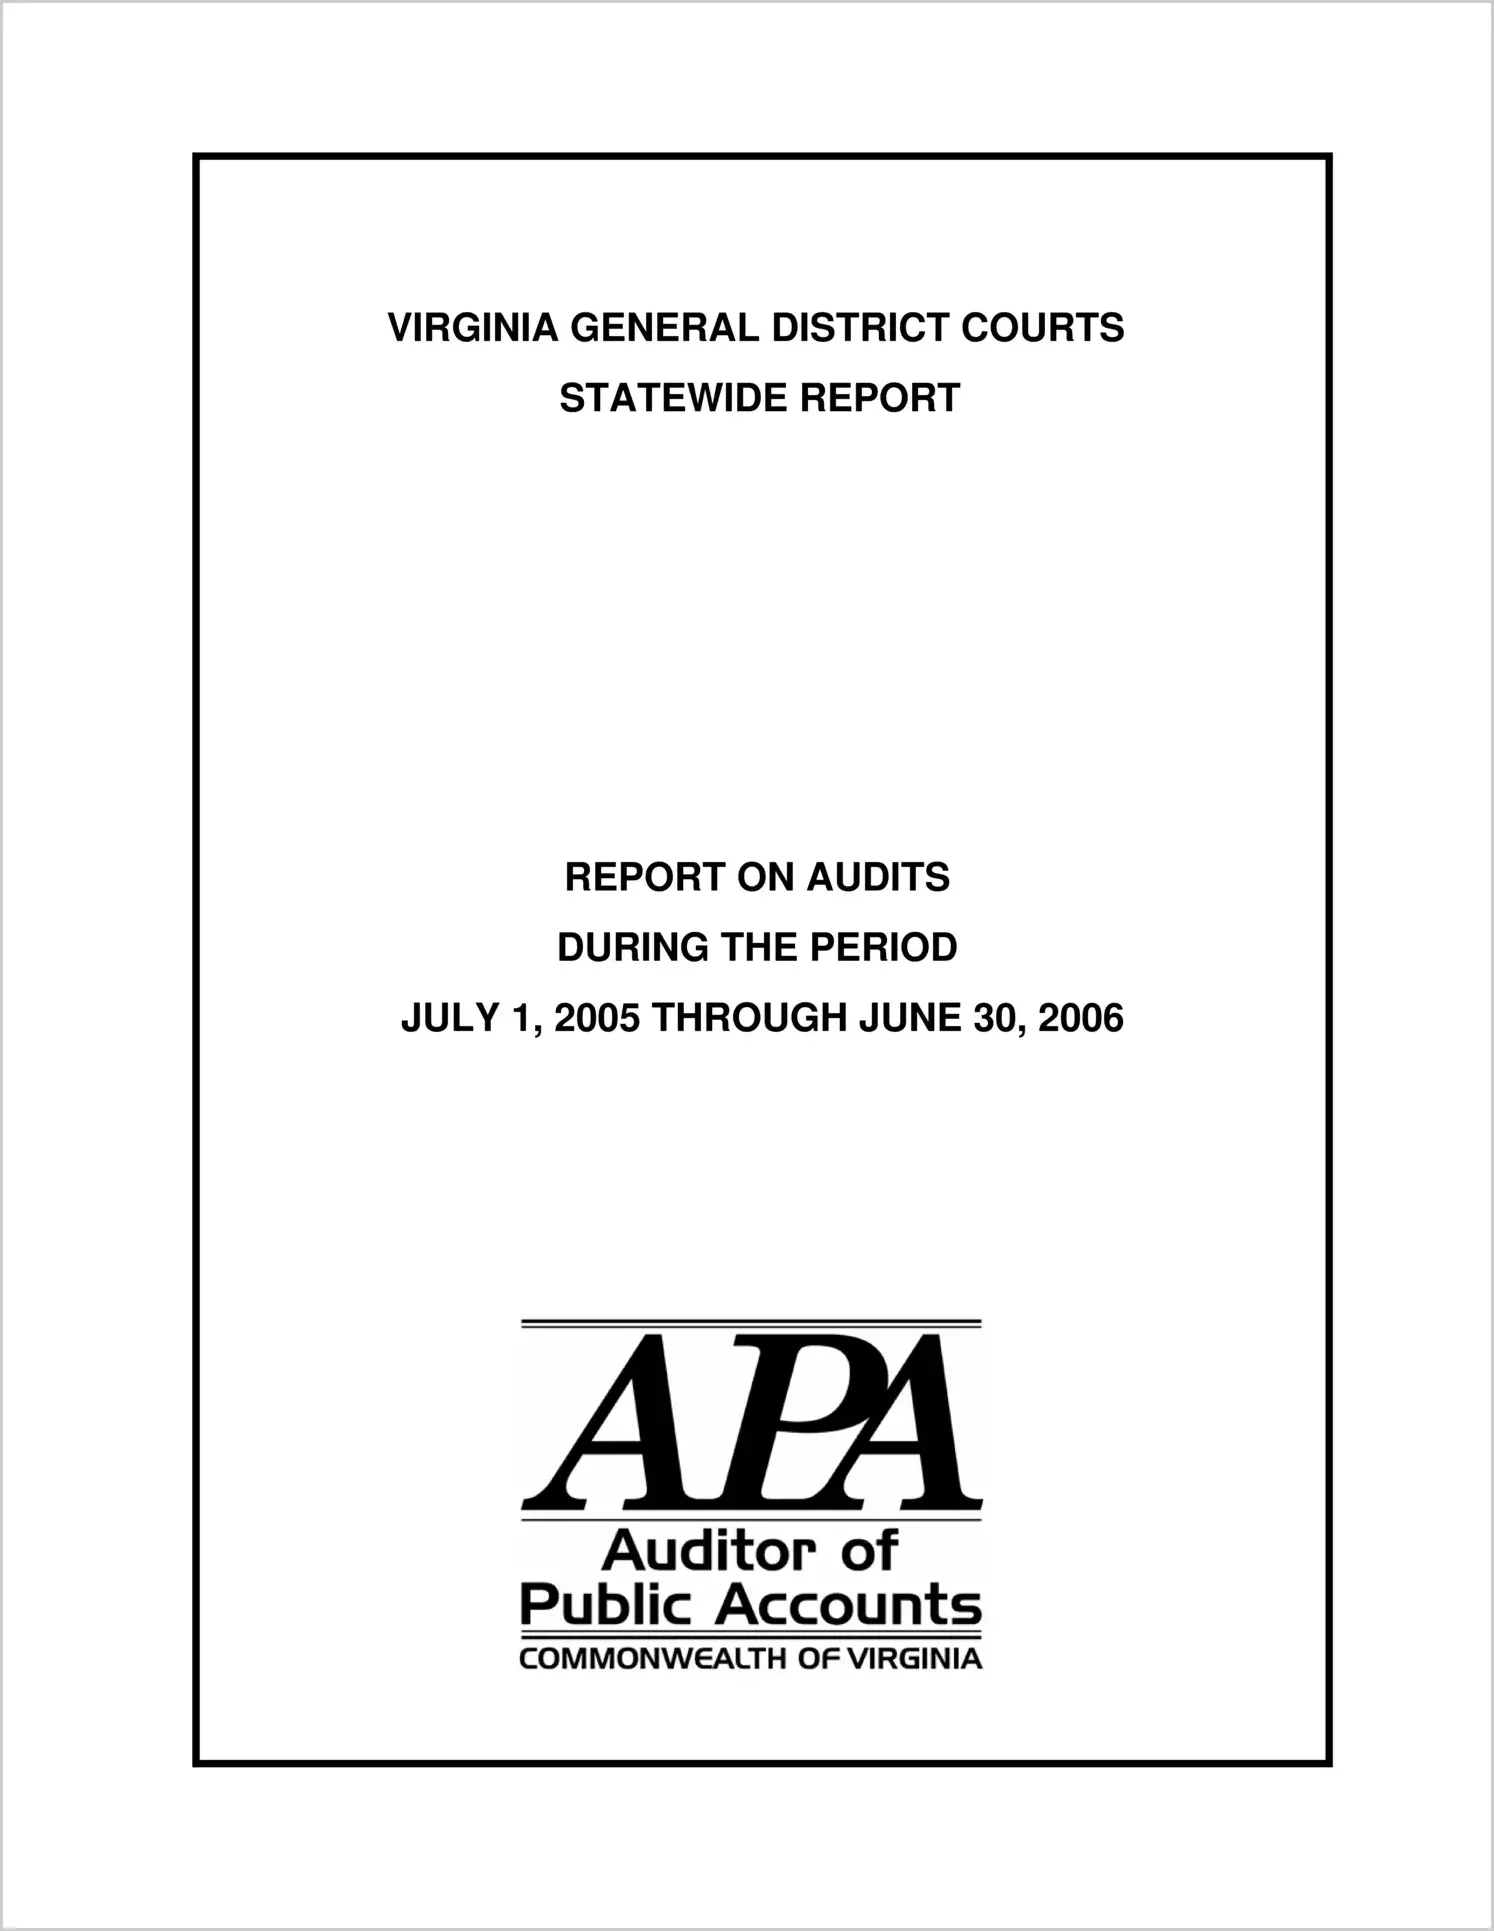 Virginia General District Courts Statewide Report on Audits During the Period of July 1, 2005 through June 30, 2006